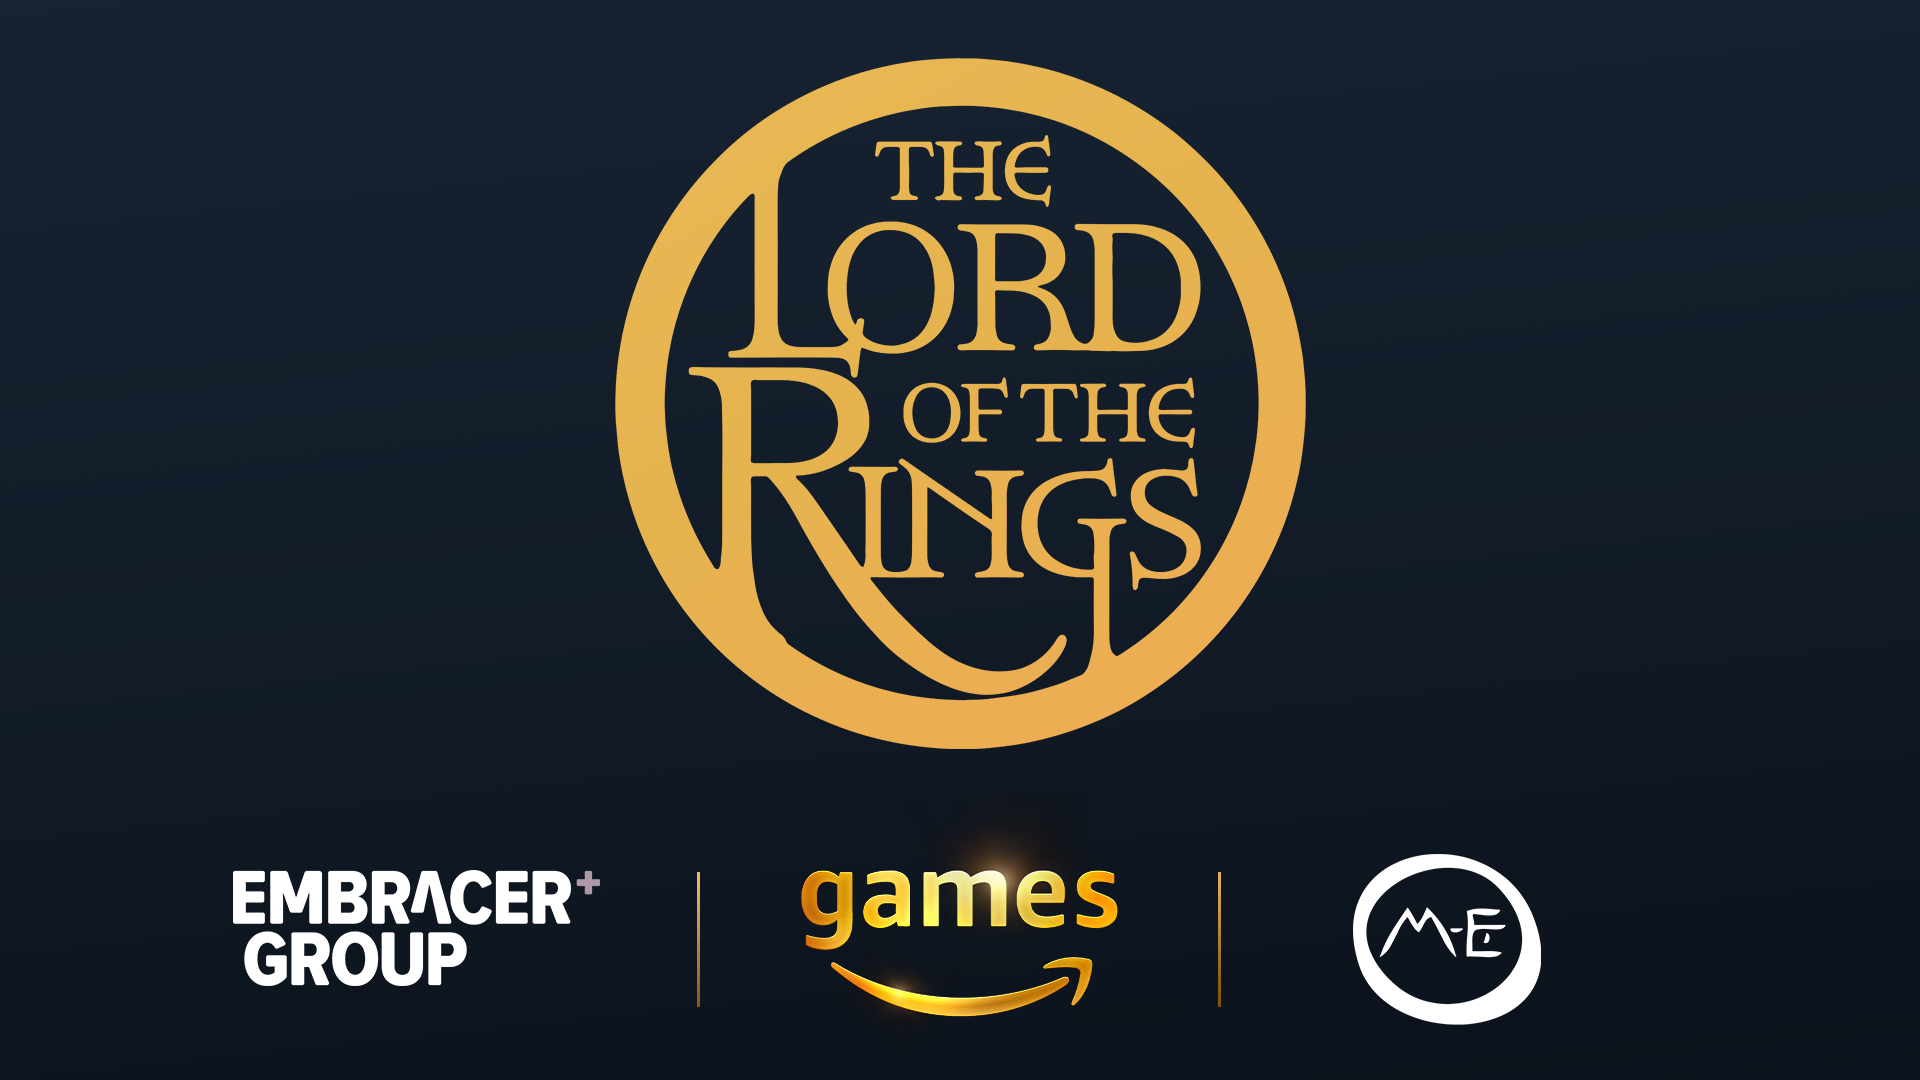 The lord of the rings logo. Embracer group logo. Amazon Games logo. Middle-earth Enterprises logo.